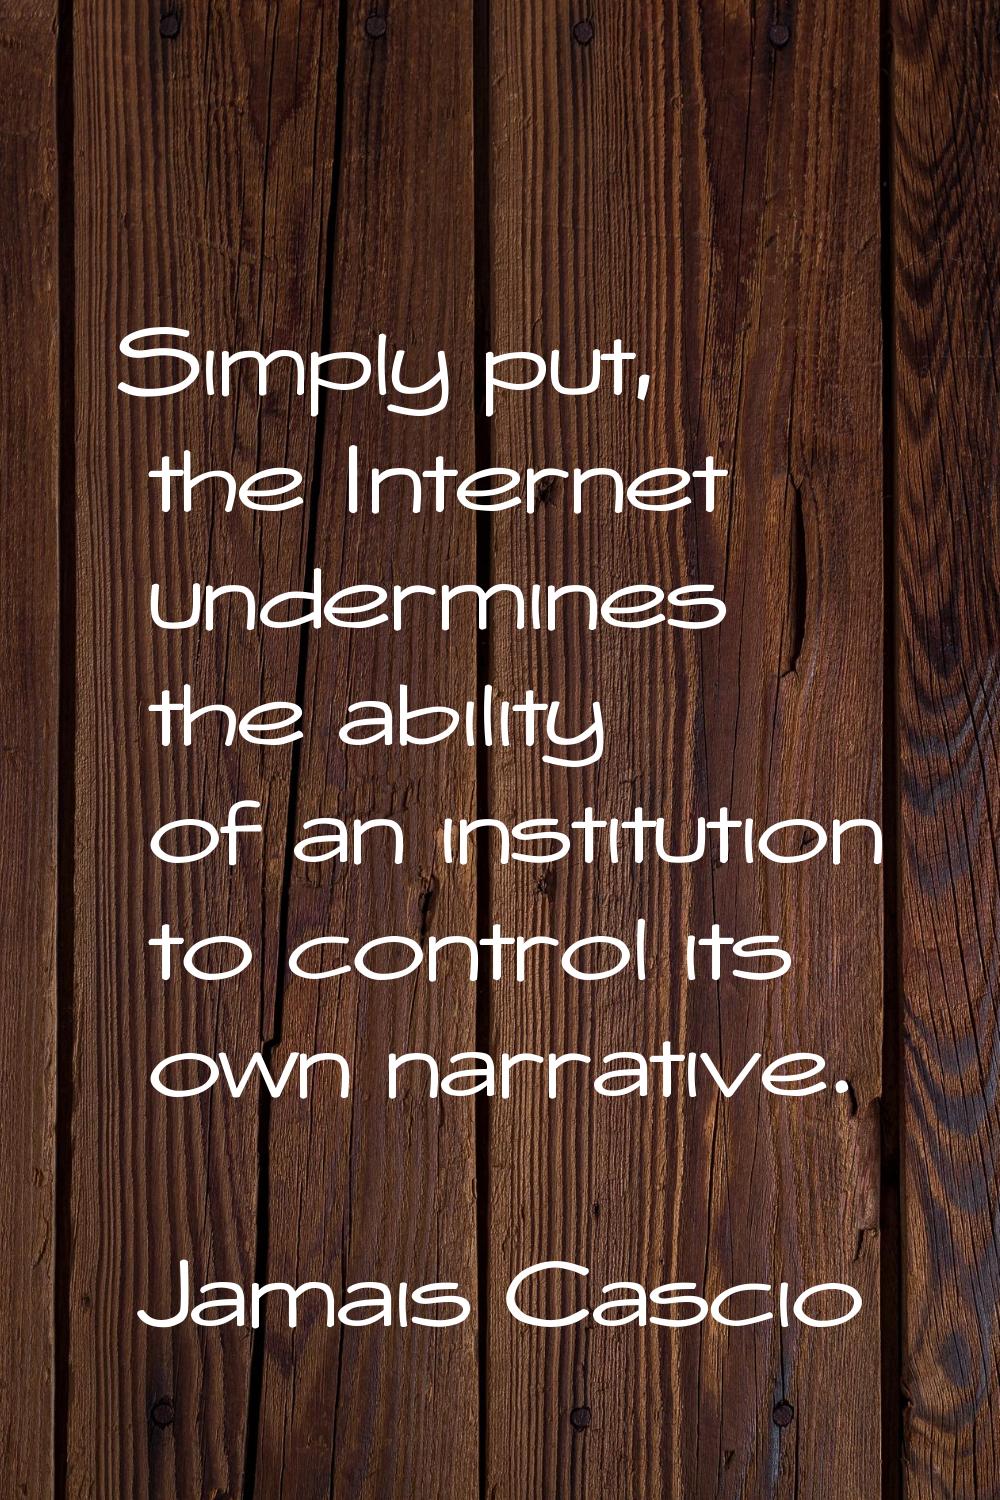 Simply put, the Internet undermines the ability of an institution to control its own narrative.